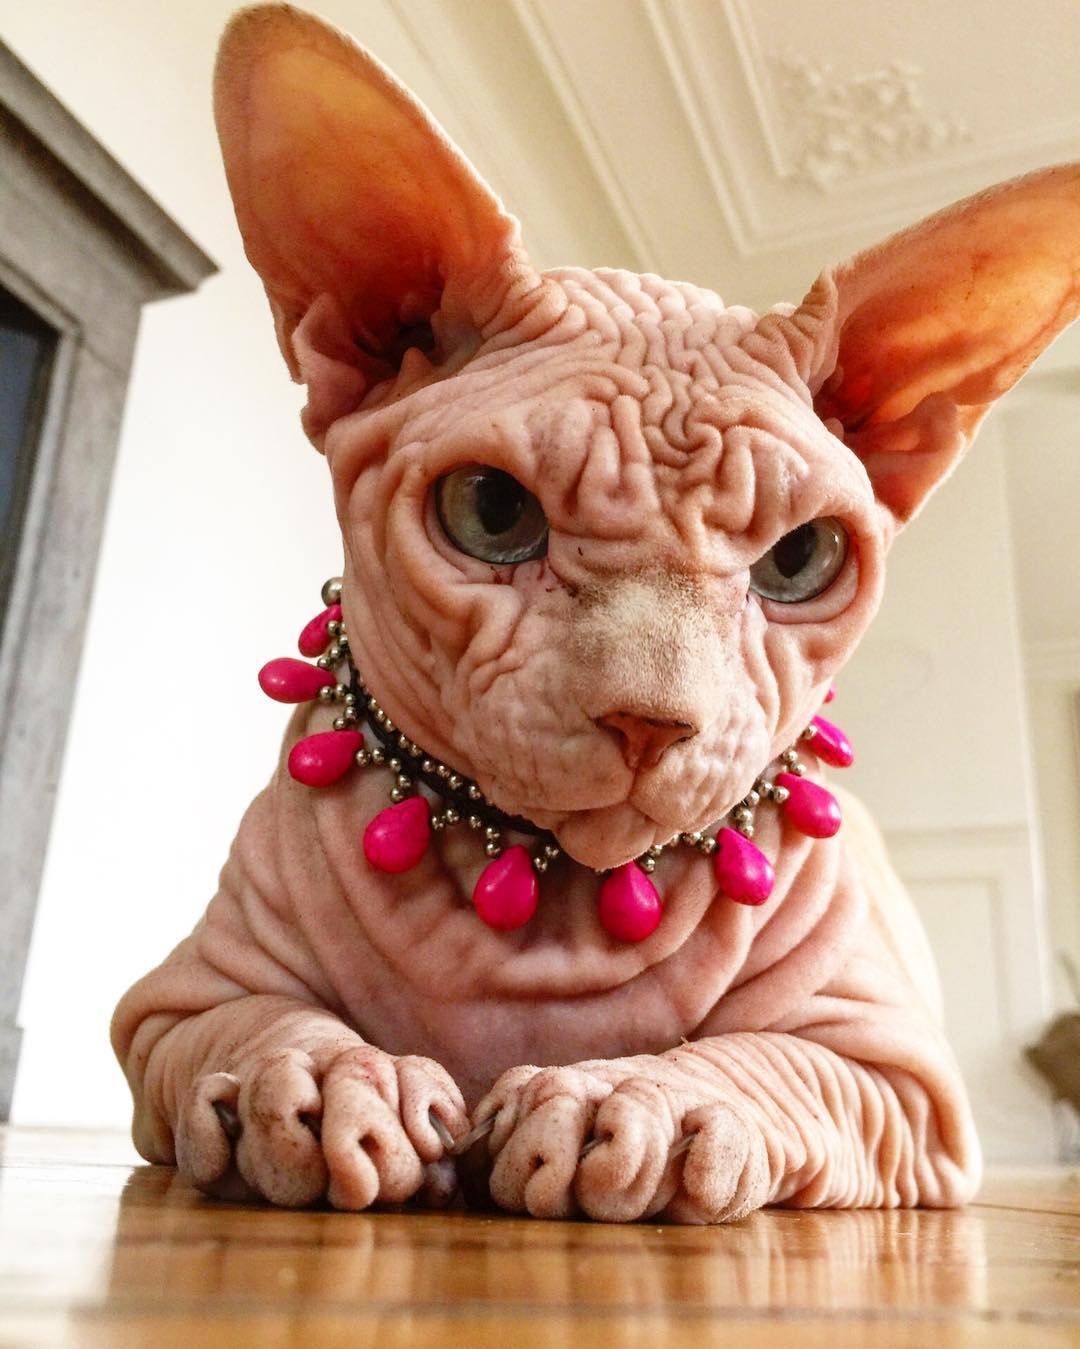 Xherdan is an unusually wrinkled cat with incredible eyes and a grumpy look...